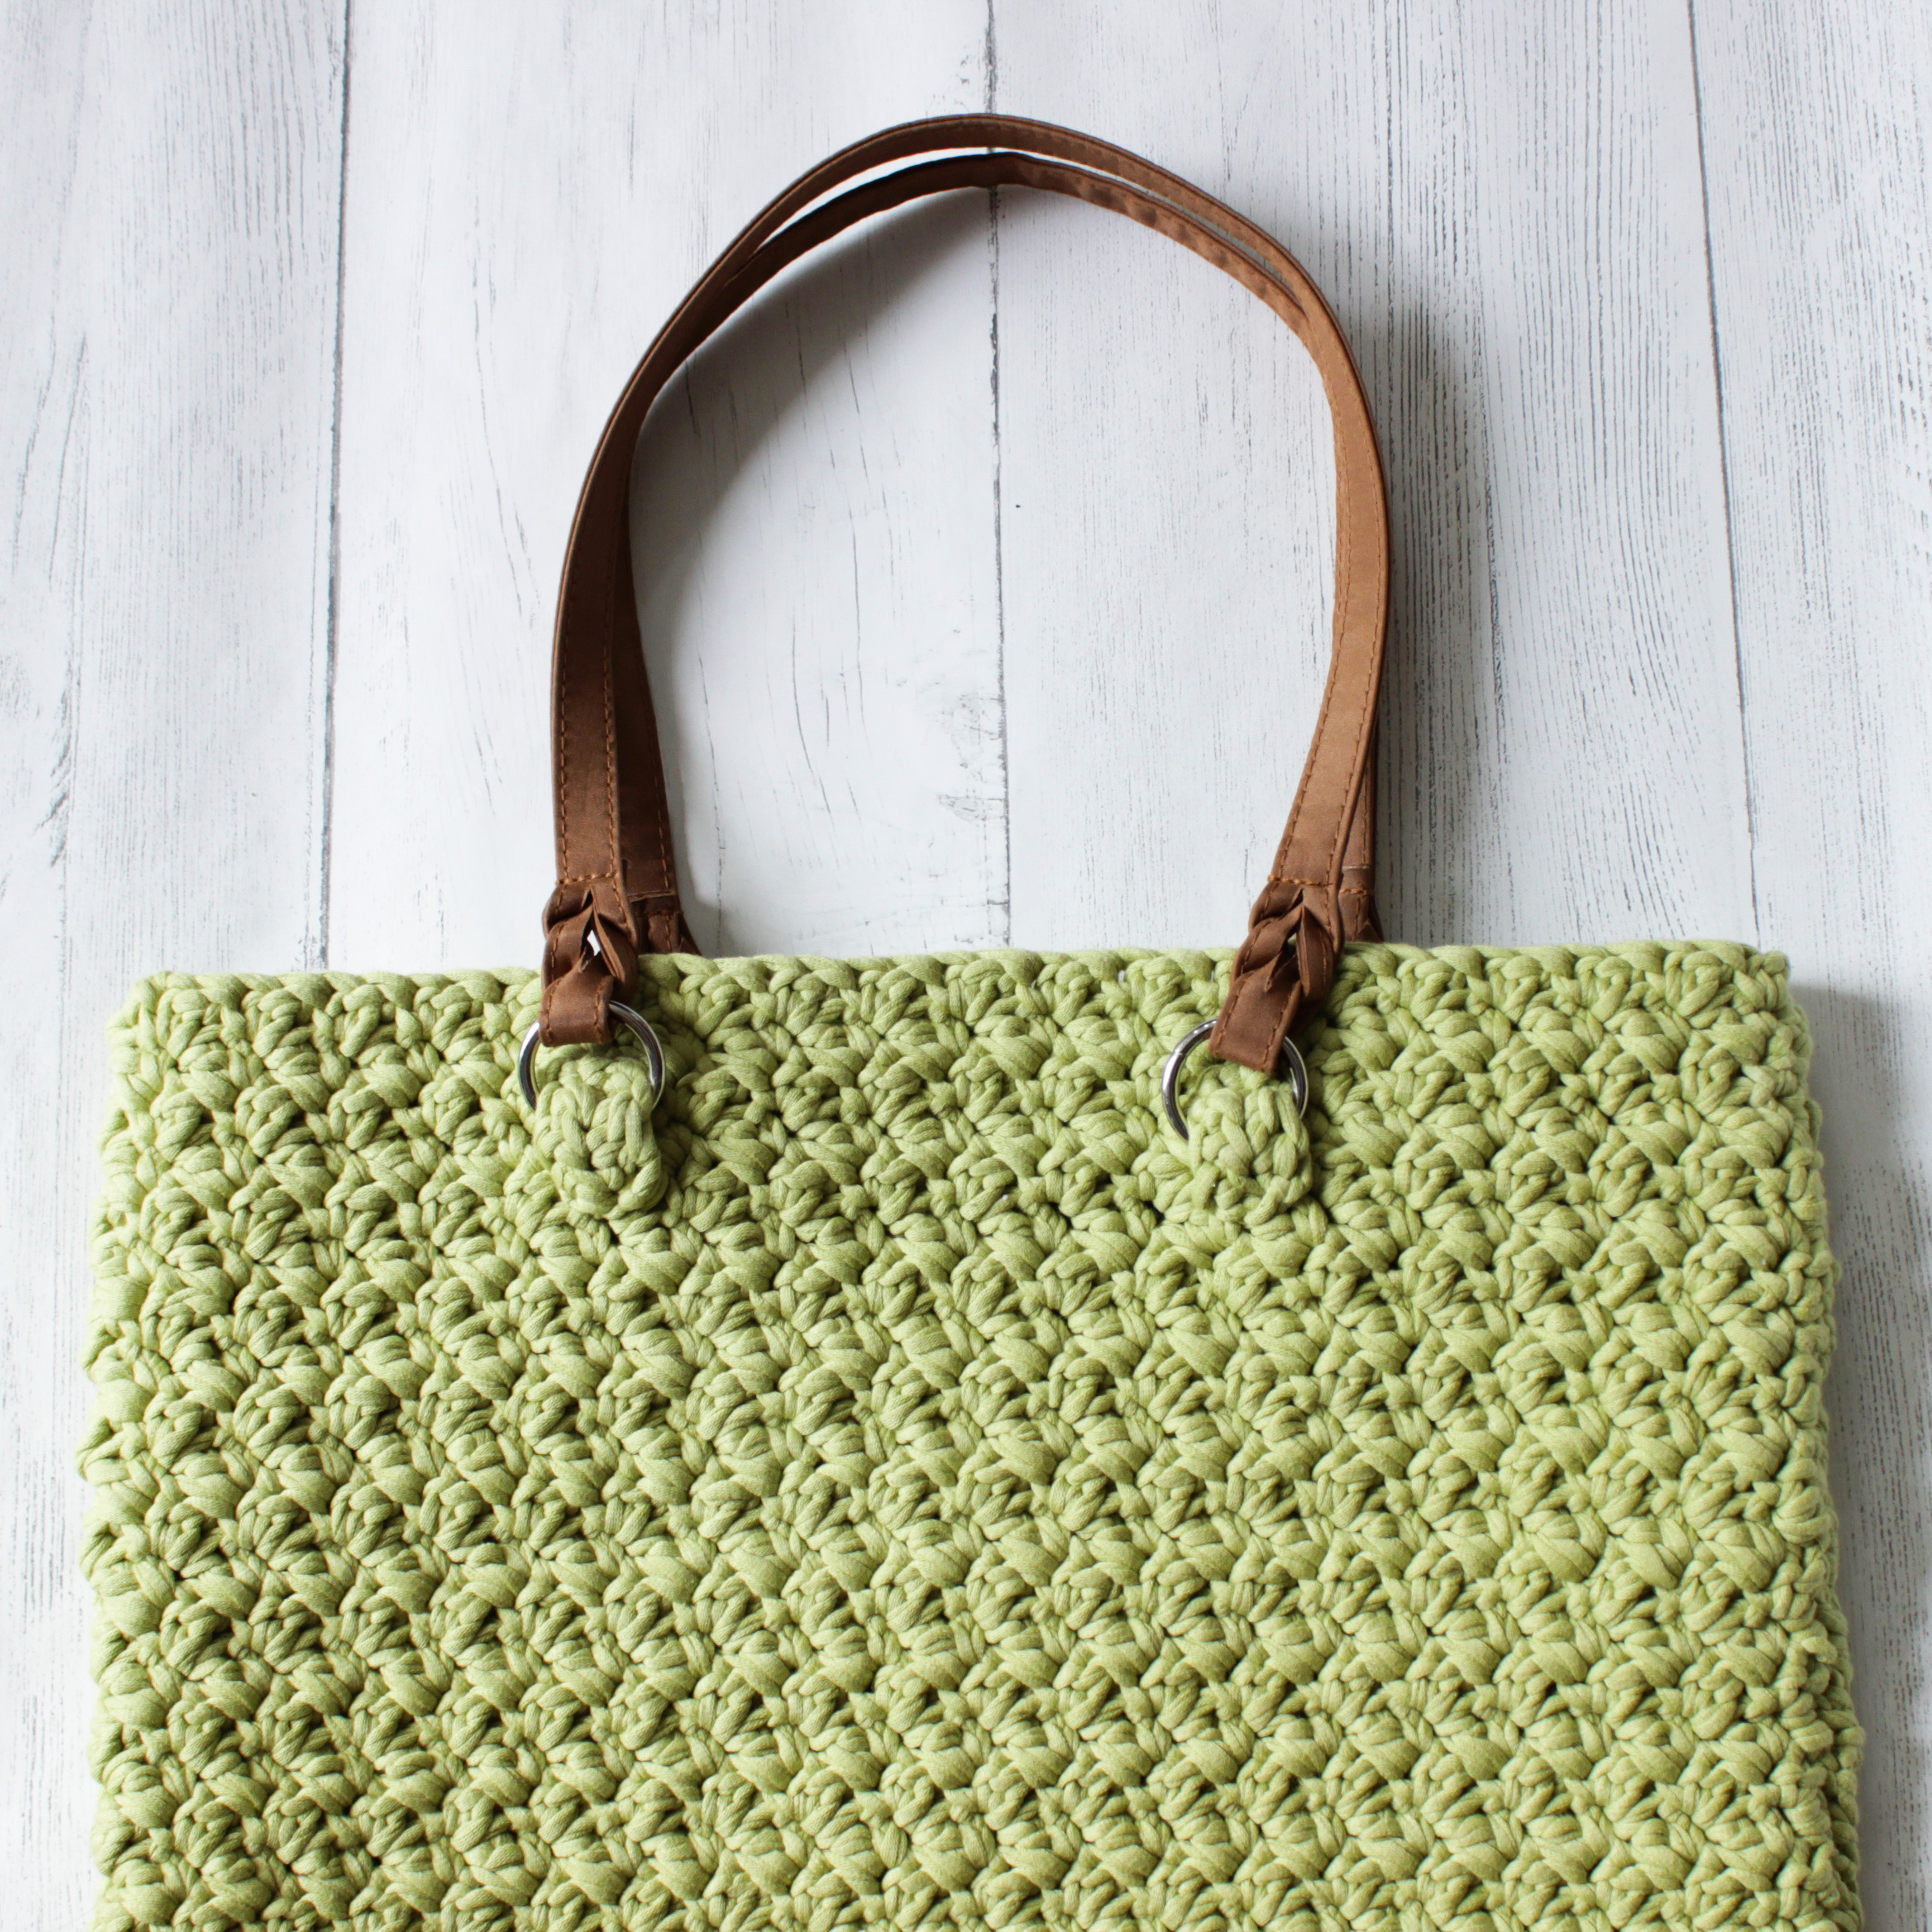 Modesty by Laura crochet Middleton Tote bag.